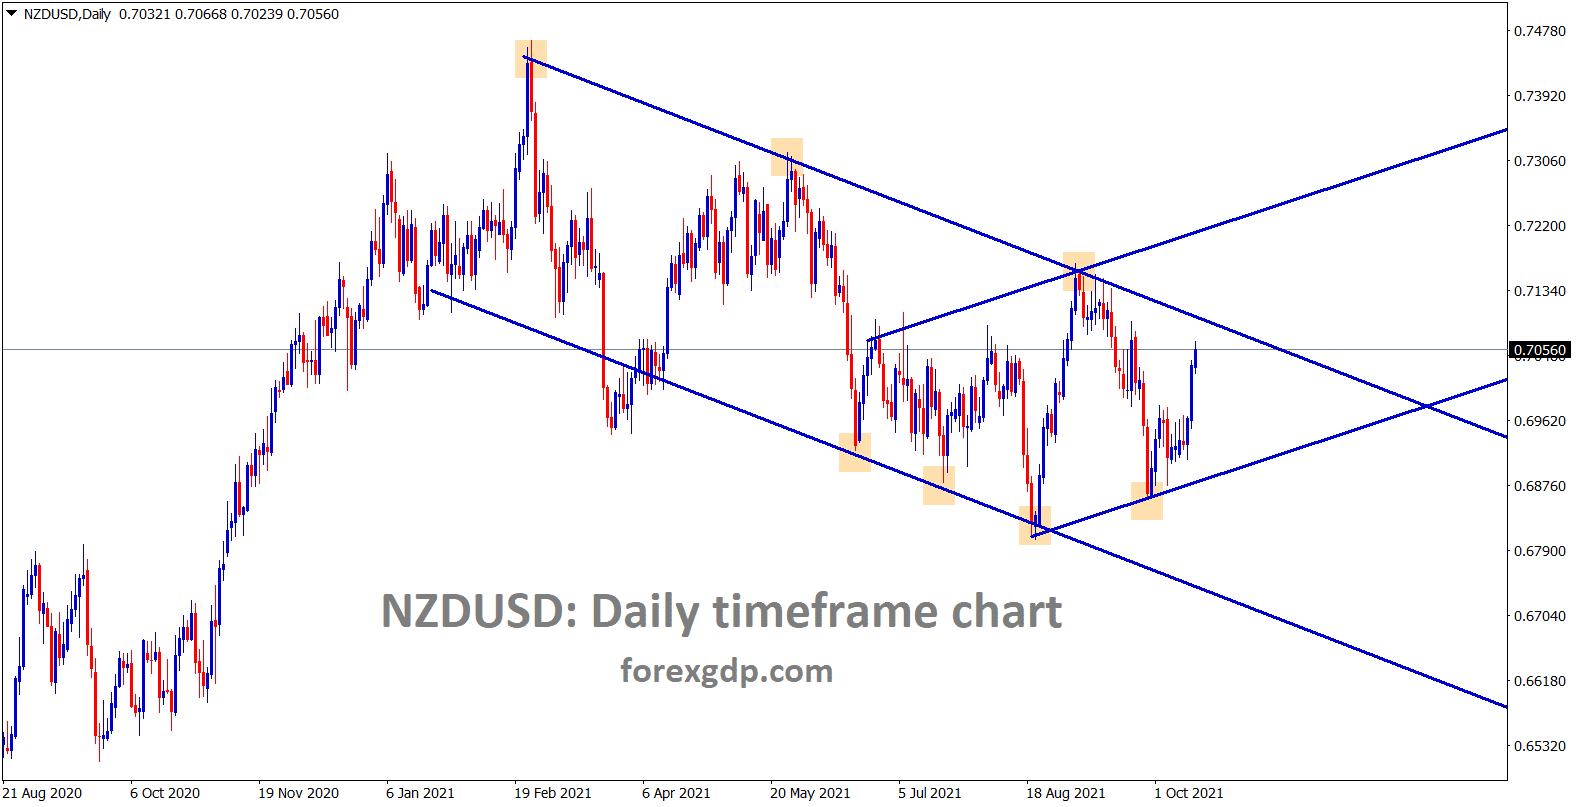 NZDUSD is moving between the channel ranges